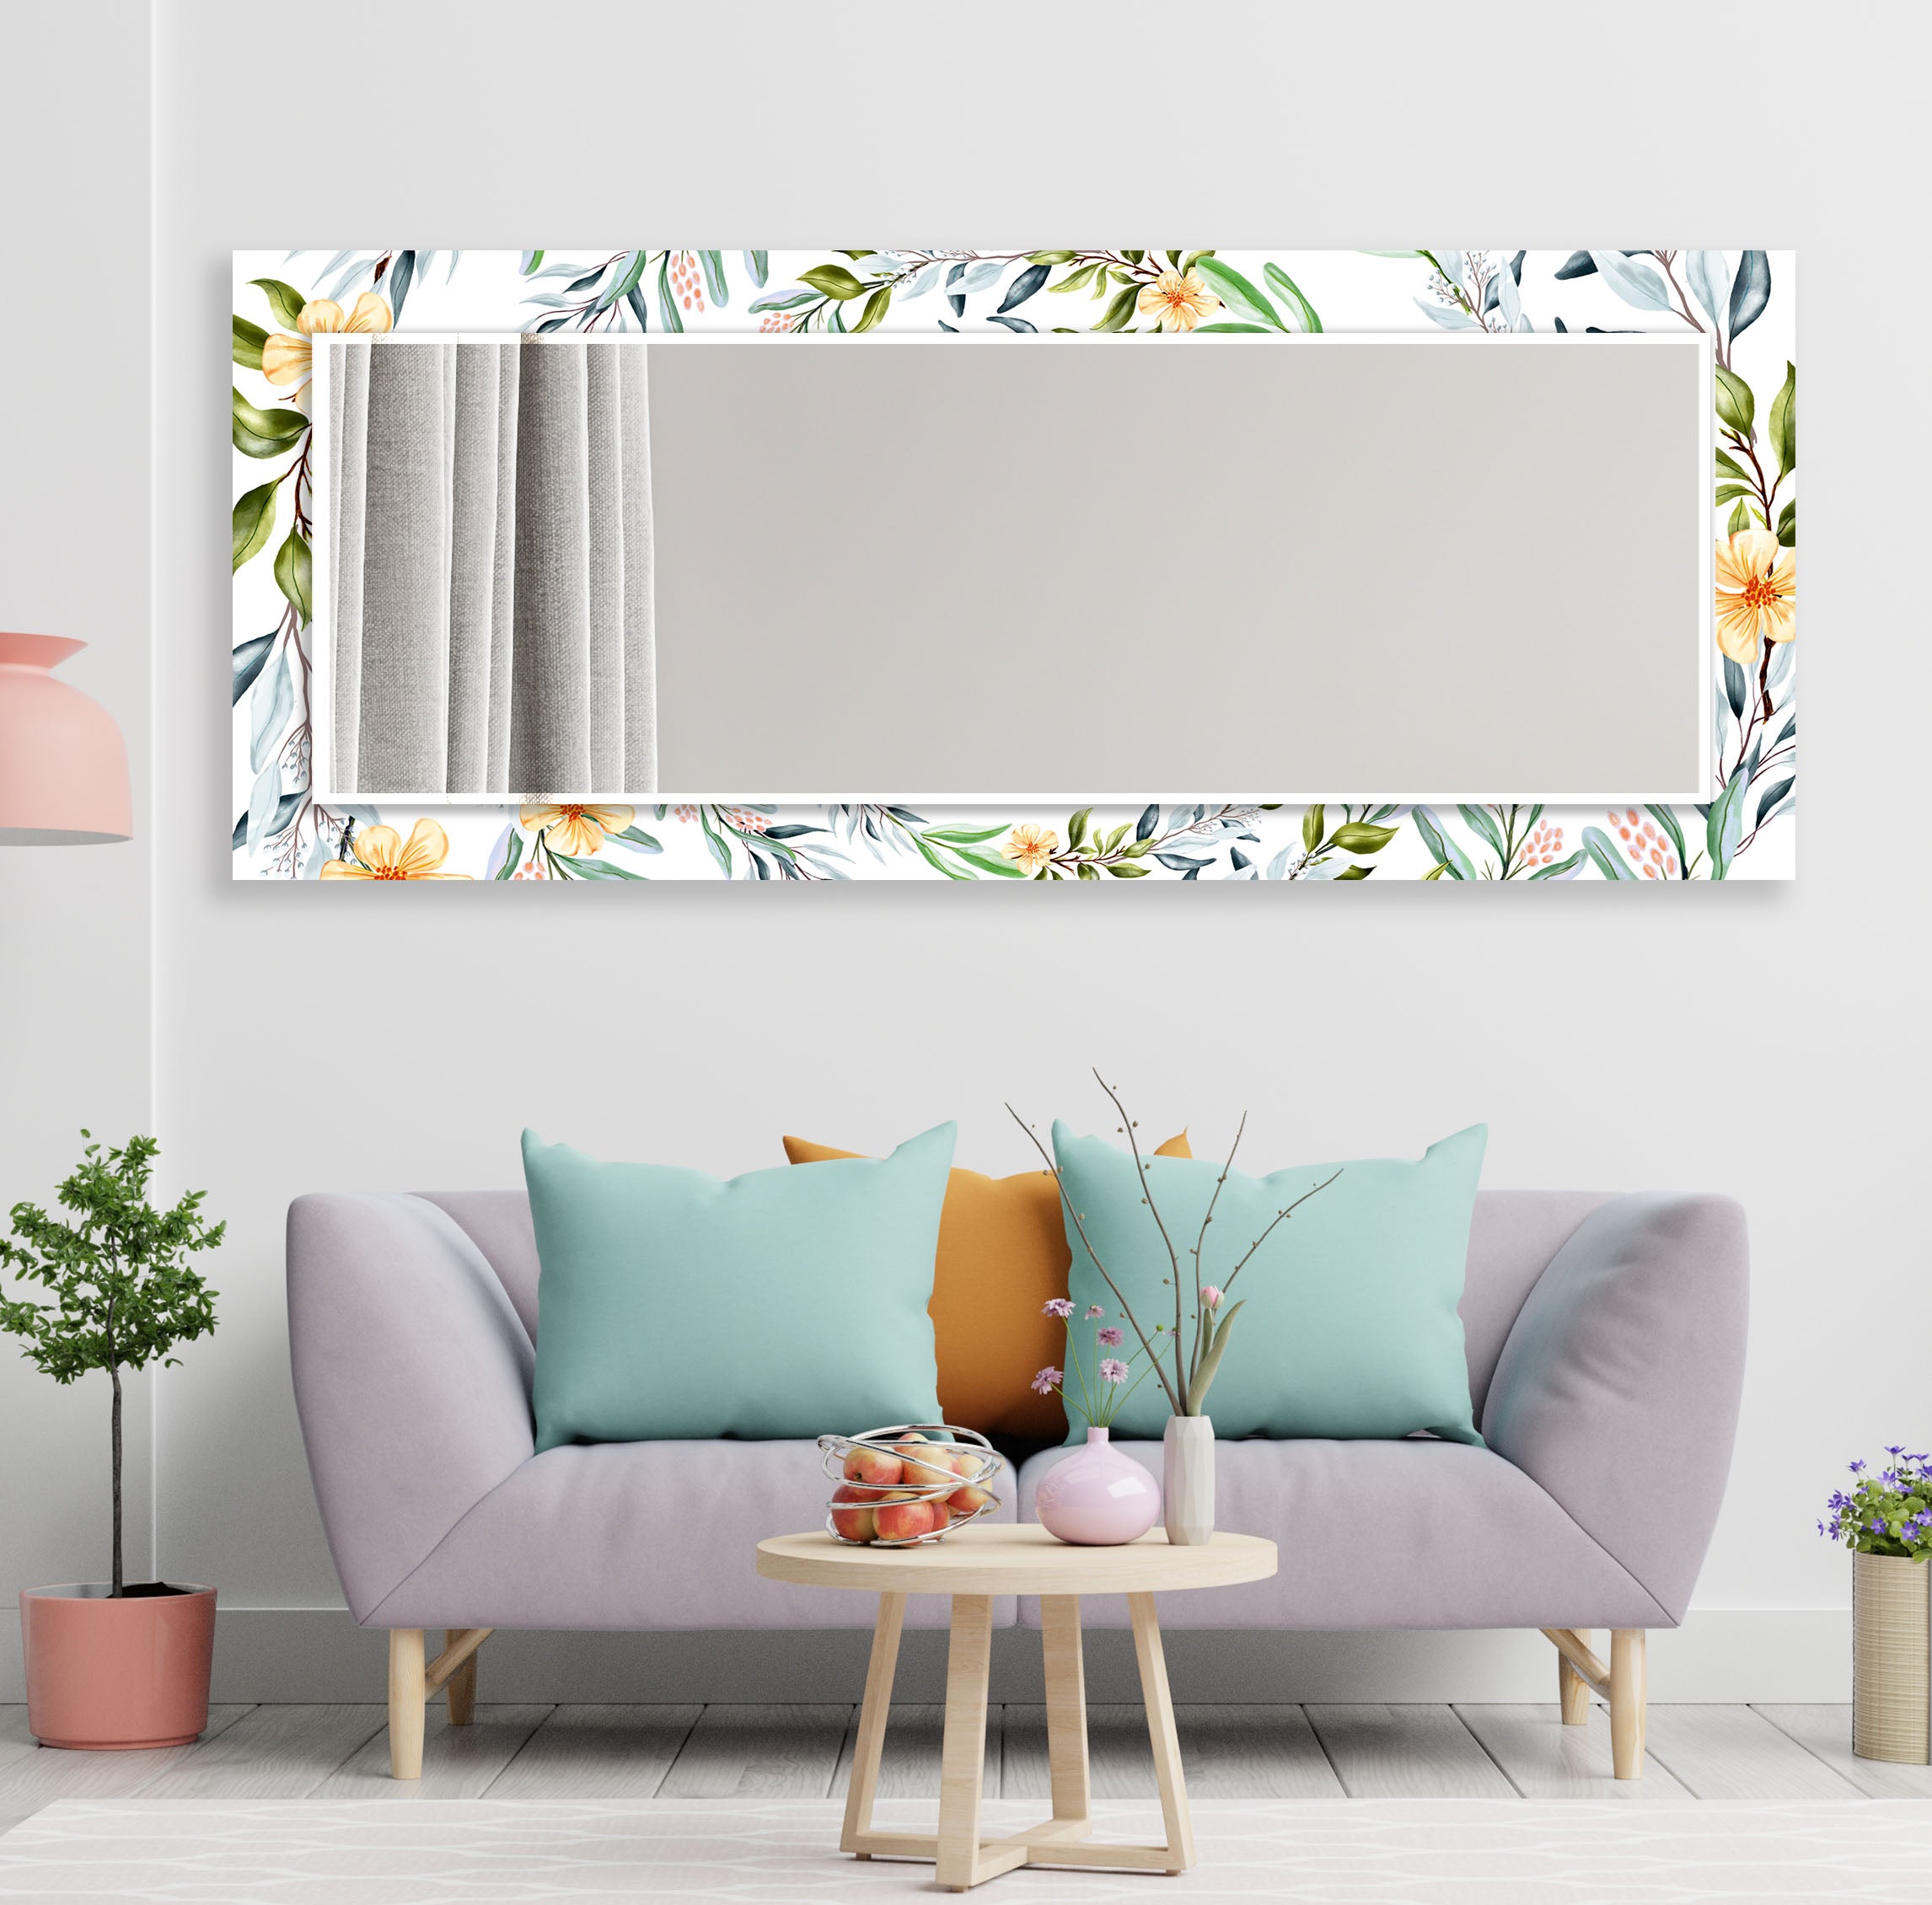 Floral Round Tempered Glass Wall Mirror